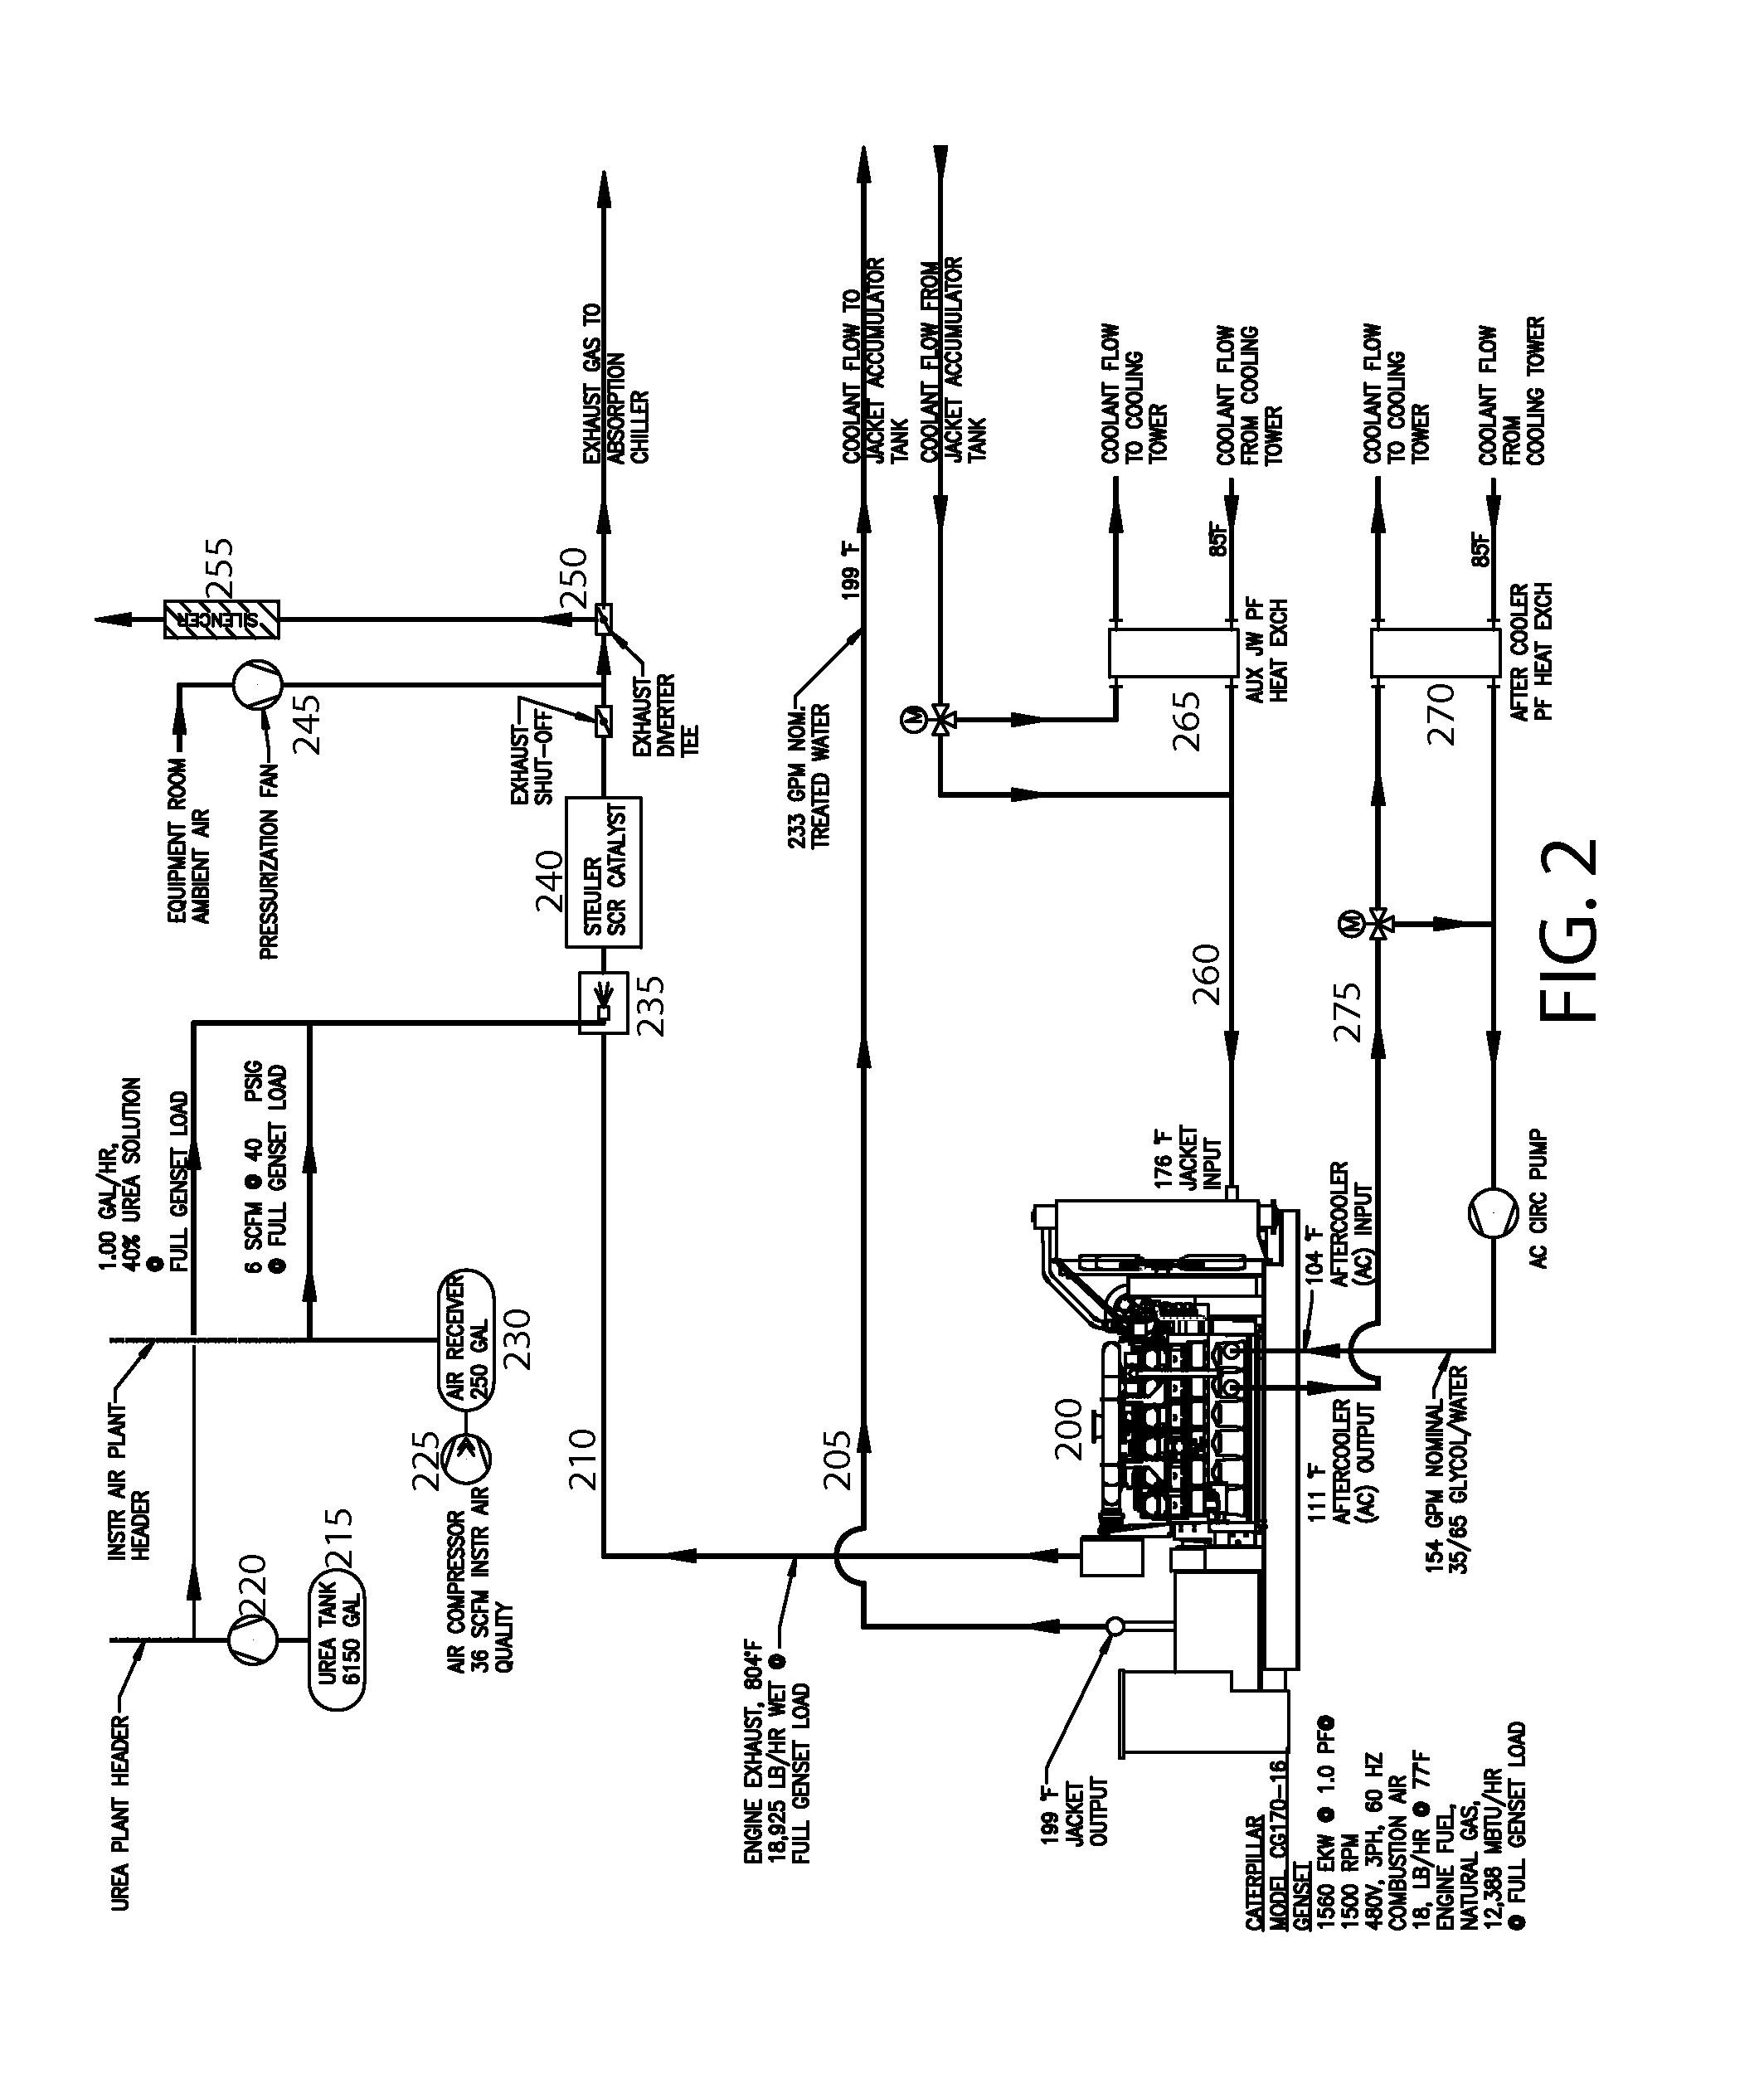 Climate control system and method for a greenhouse